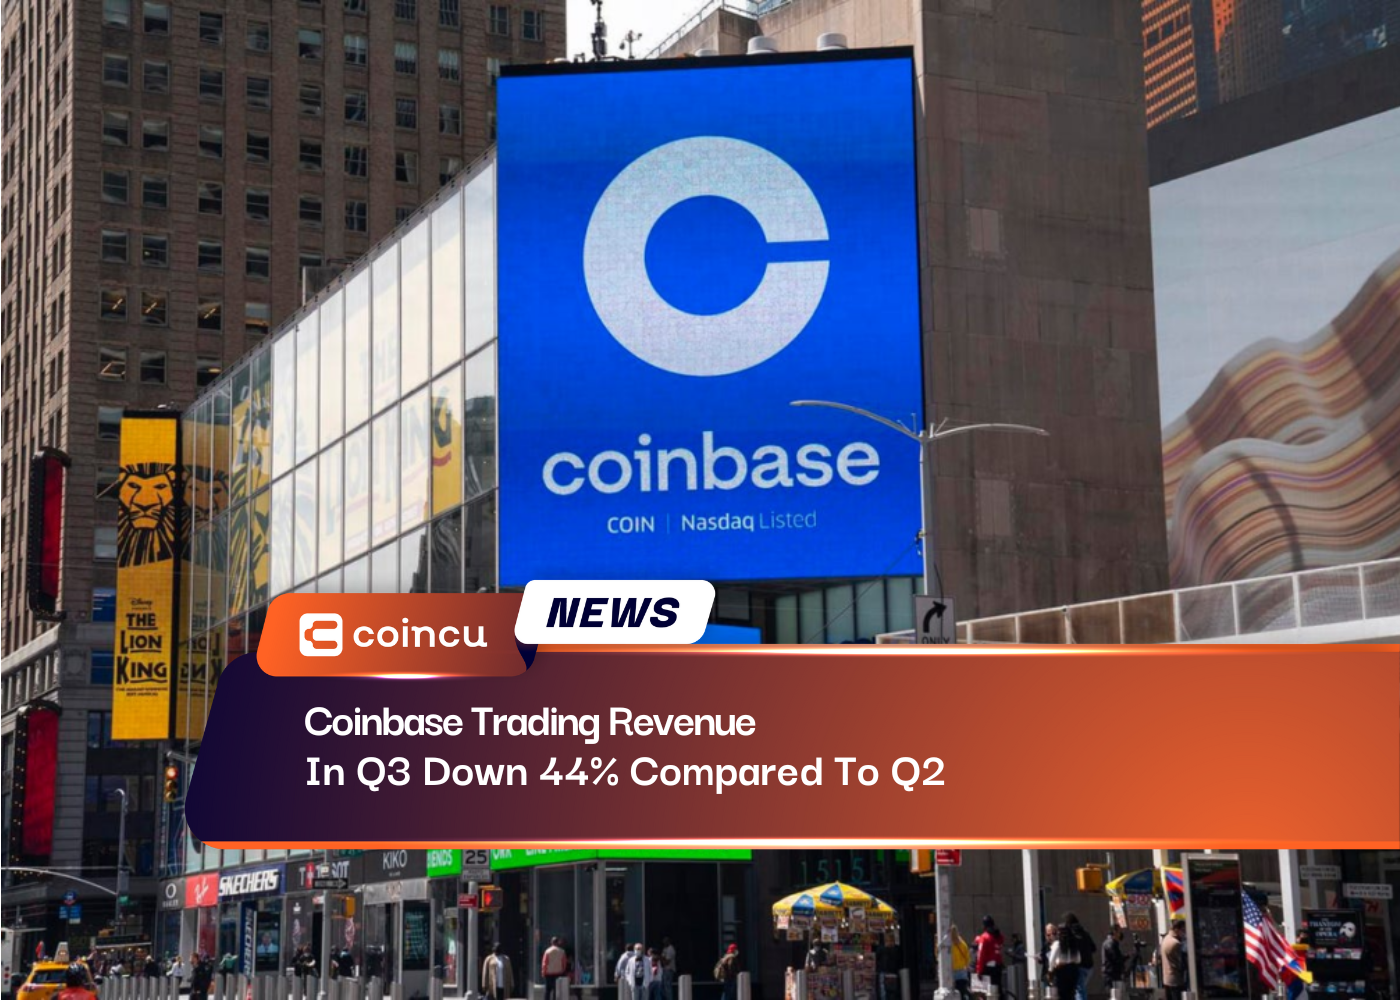 Coinbase Trading Revenue In Q3 Down 44% Compared To Q2